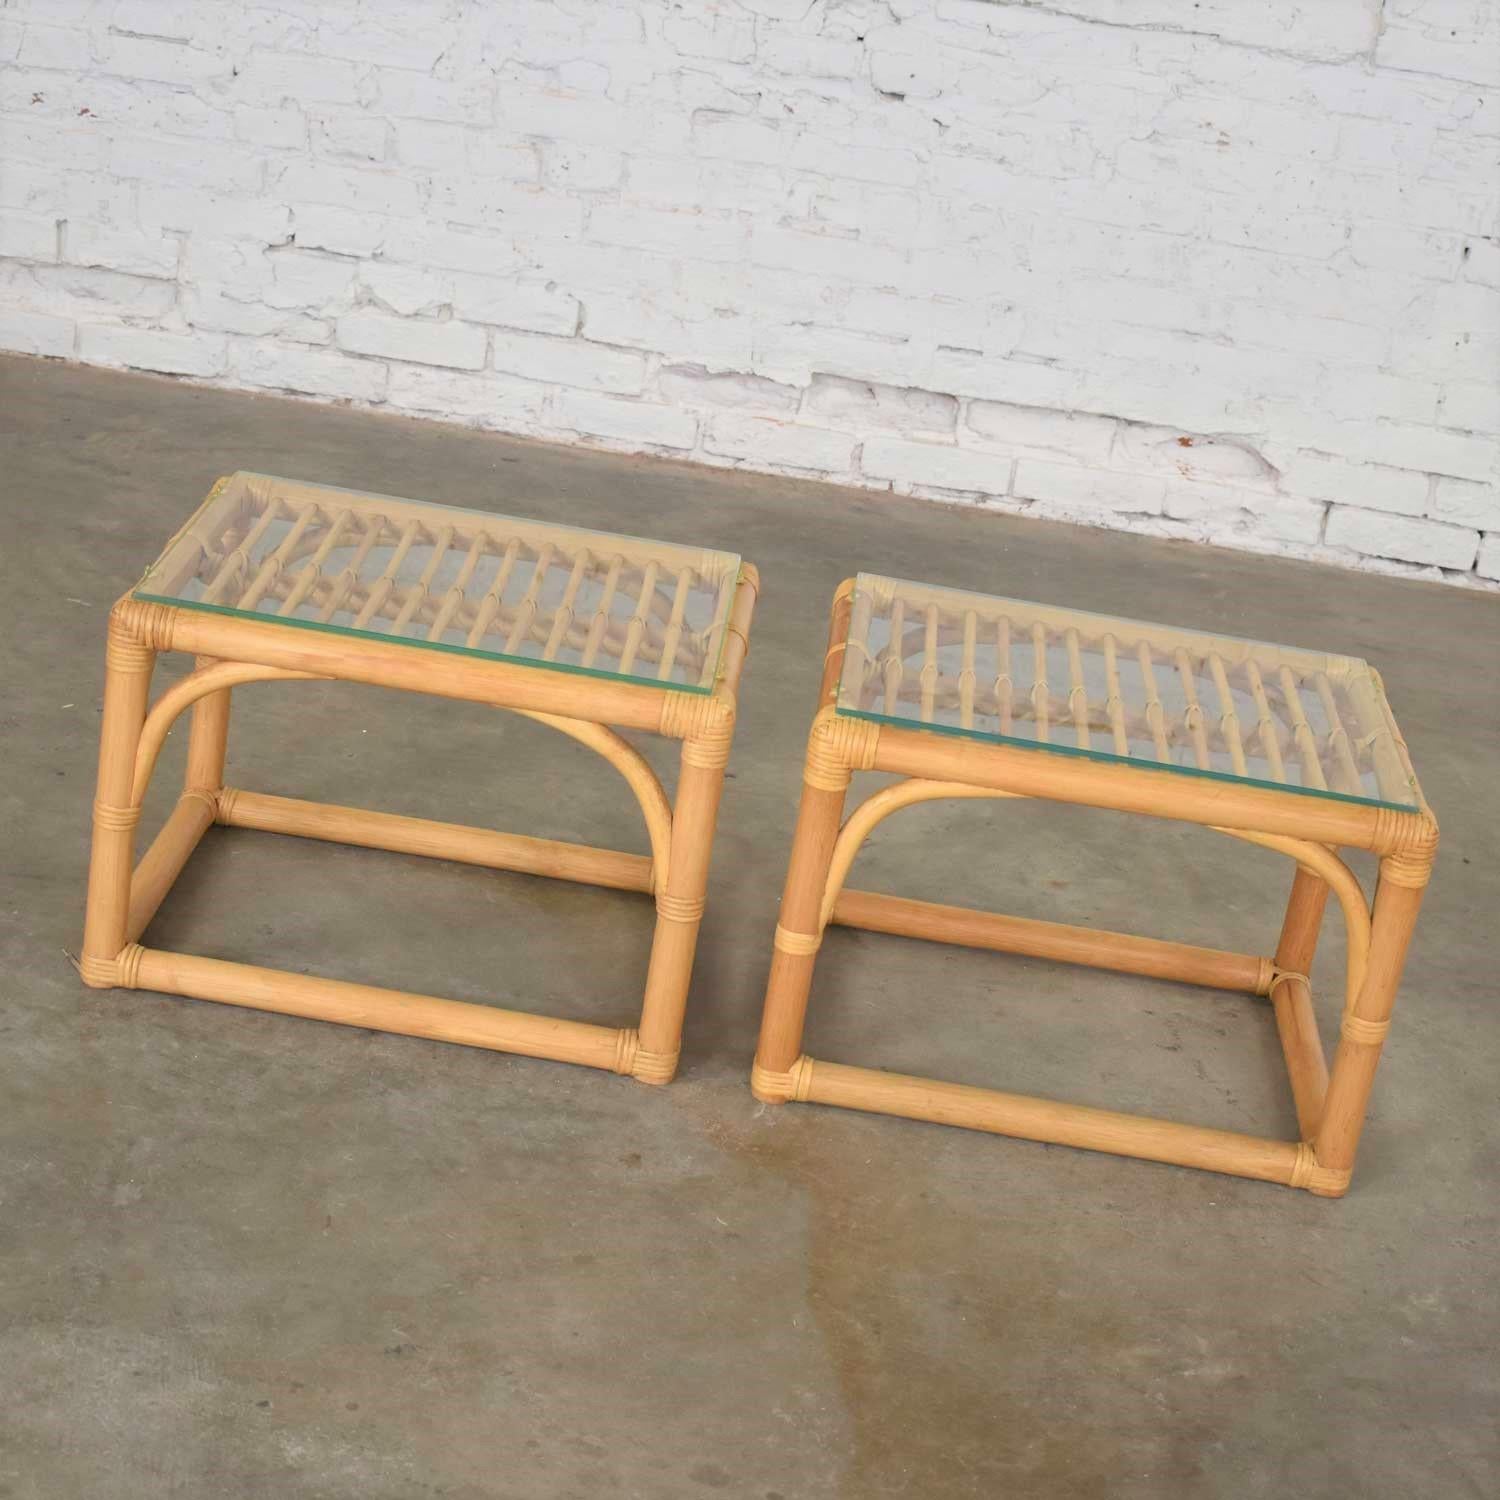 Handsome modern pair of rattan rectangular side tables or end tables with a glass top. They are in fabulous vintage condition with no outstanding flaws we have detected. Glass may have minor scratching. Please see photos, circa